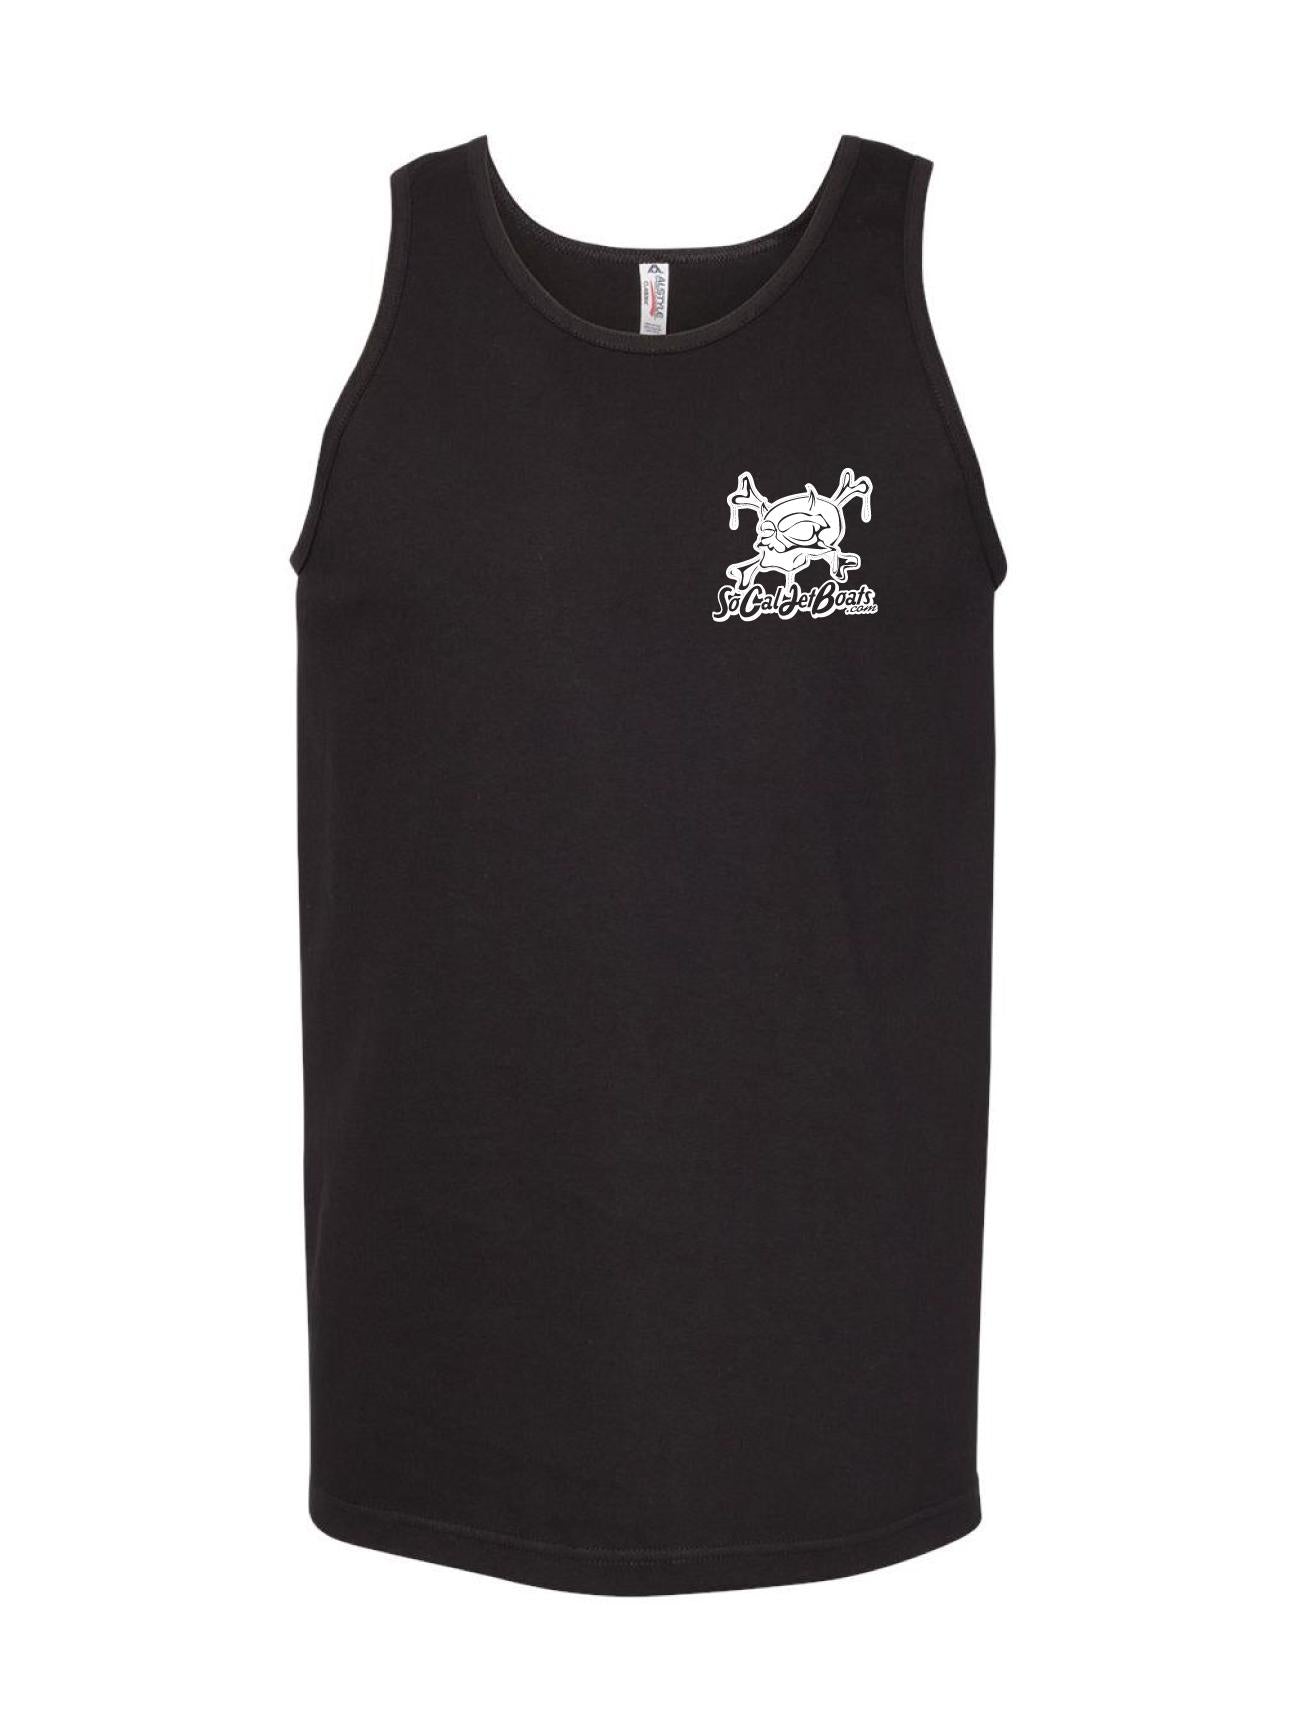 Support Your Local Drag Boat Racer - Womens Tank Top - SoCal Jet Boats